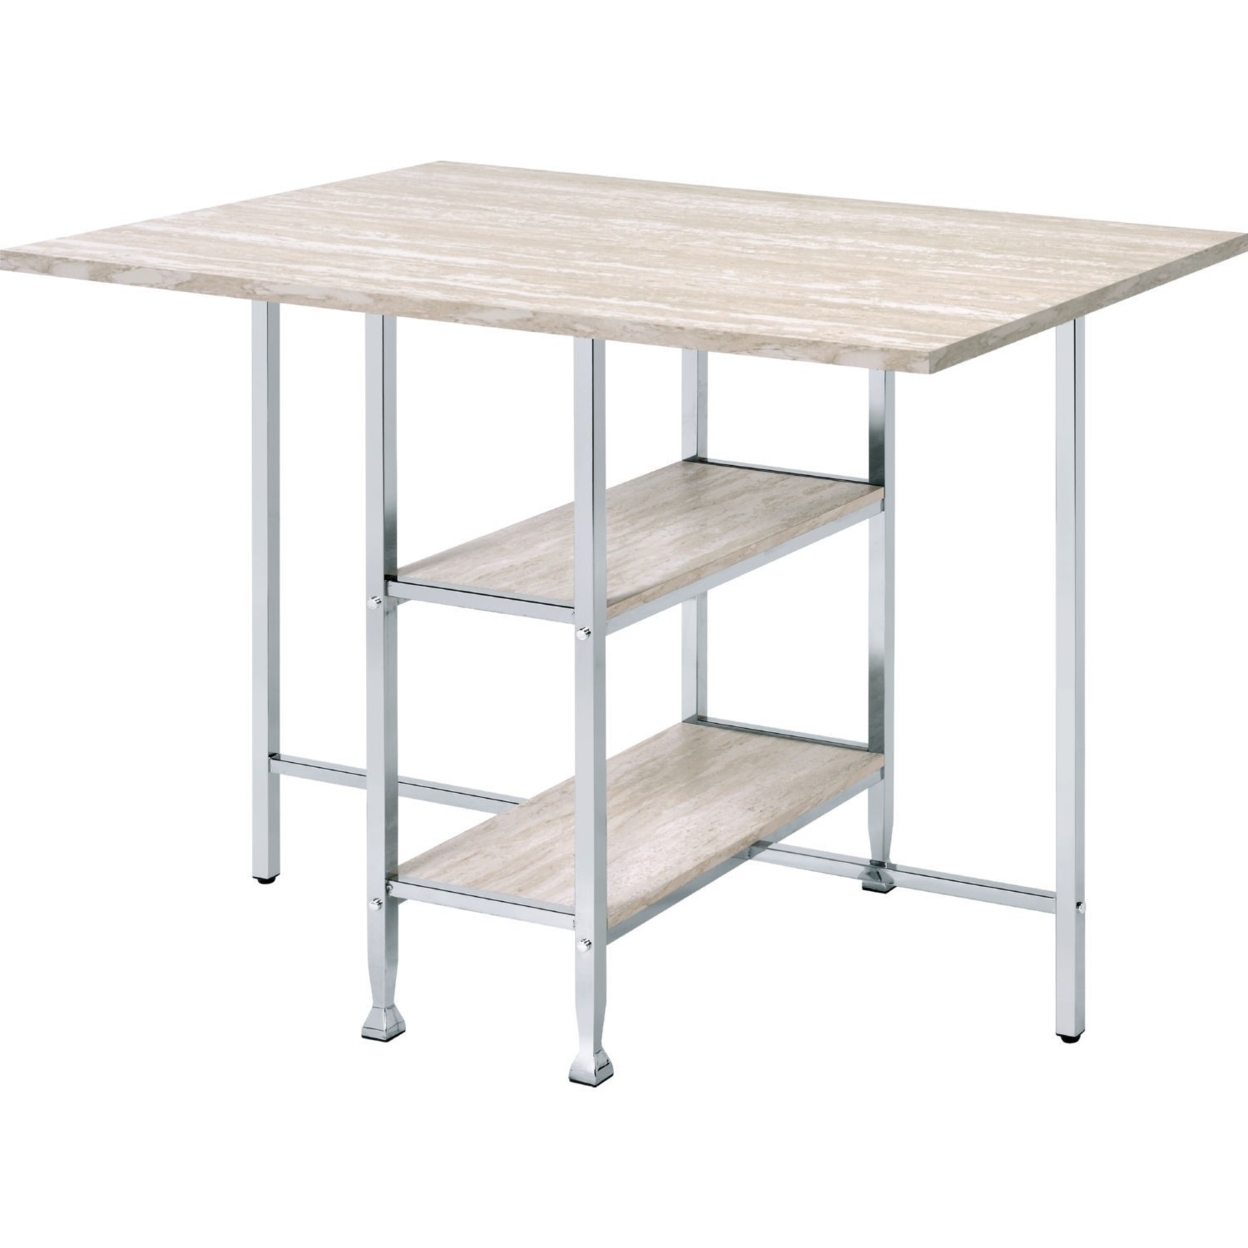 Counter Height Table With 2 Shelves, Antique White And Chrome- Saltoro Sherpi